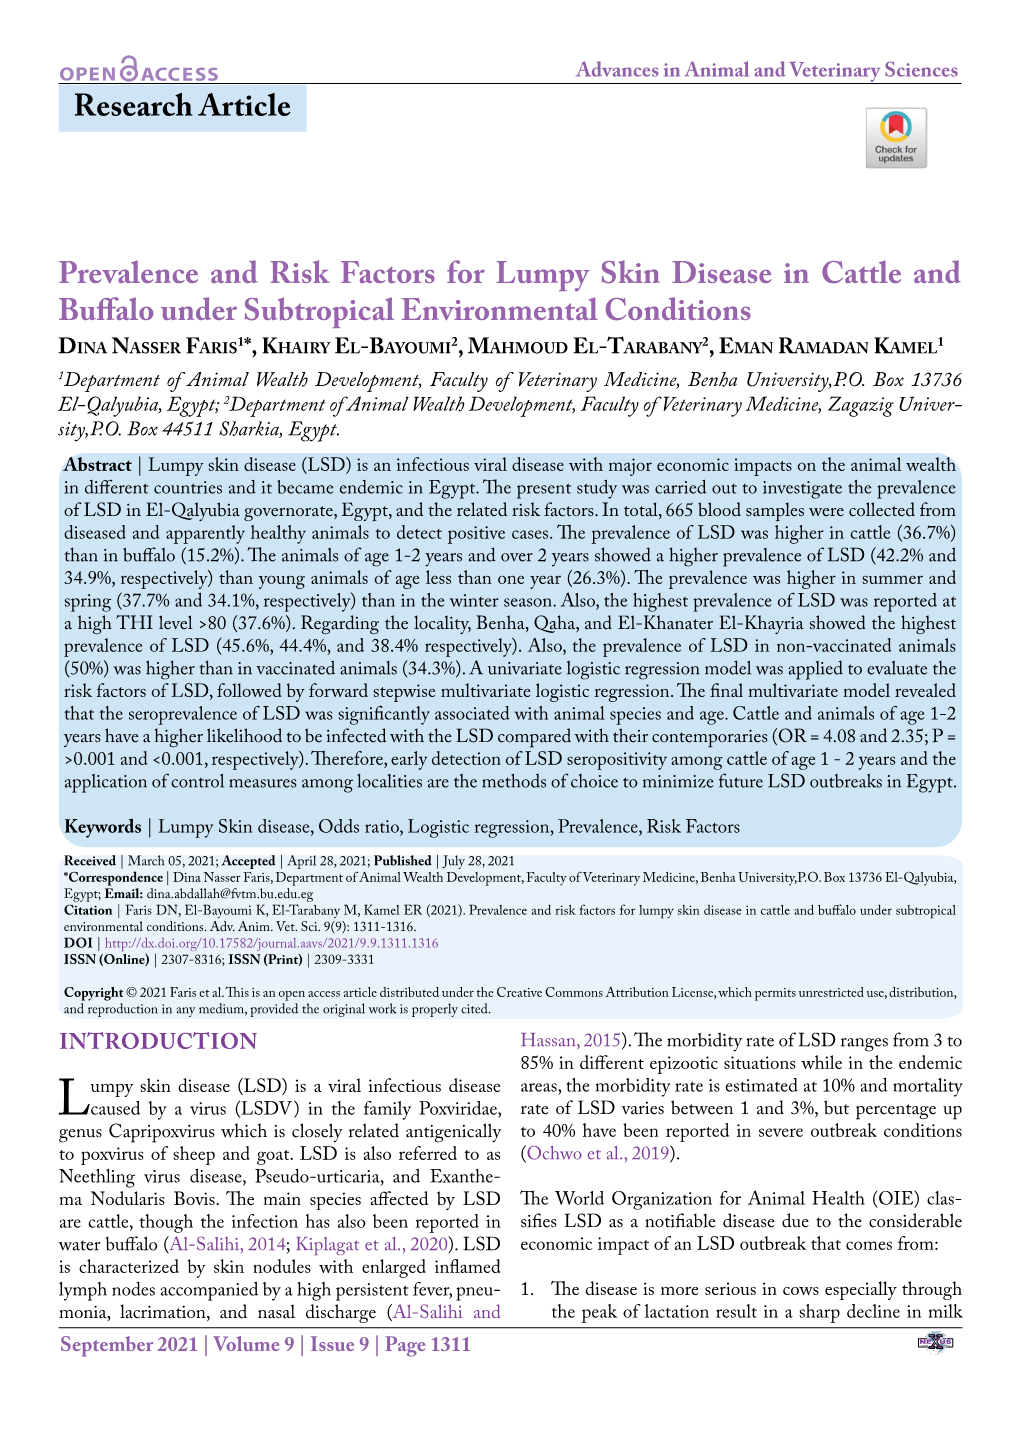 Prevalence and Risk Factors for Lumpy Skin Disease in Cattle And